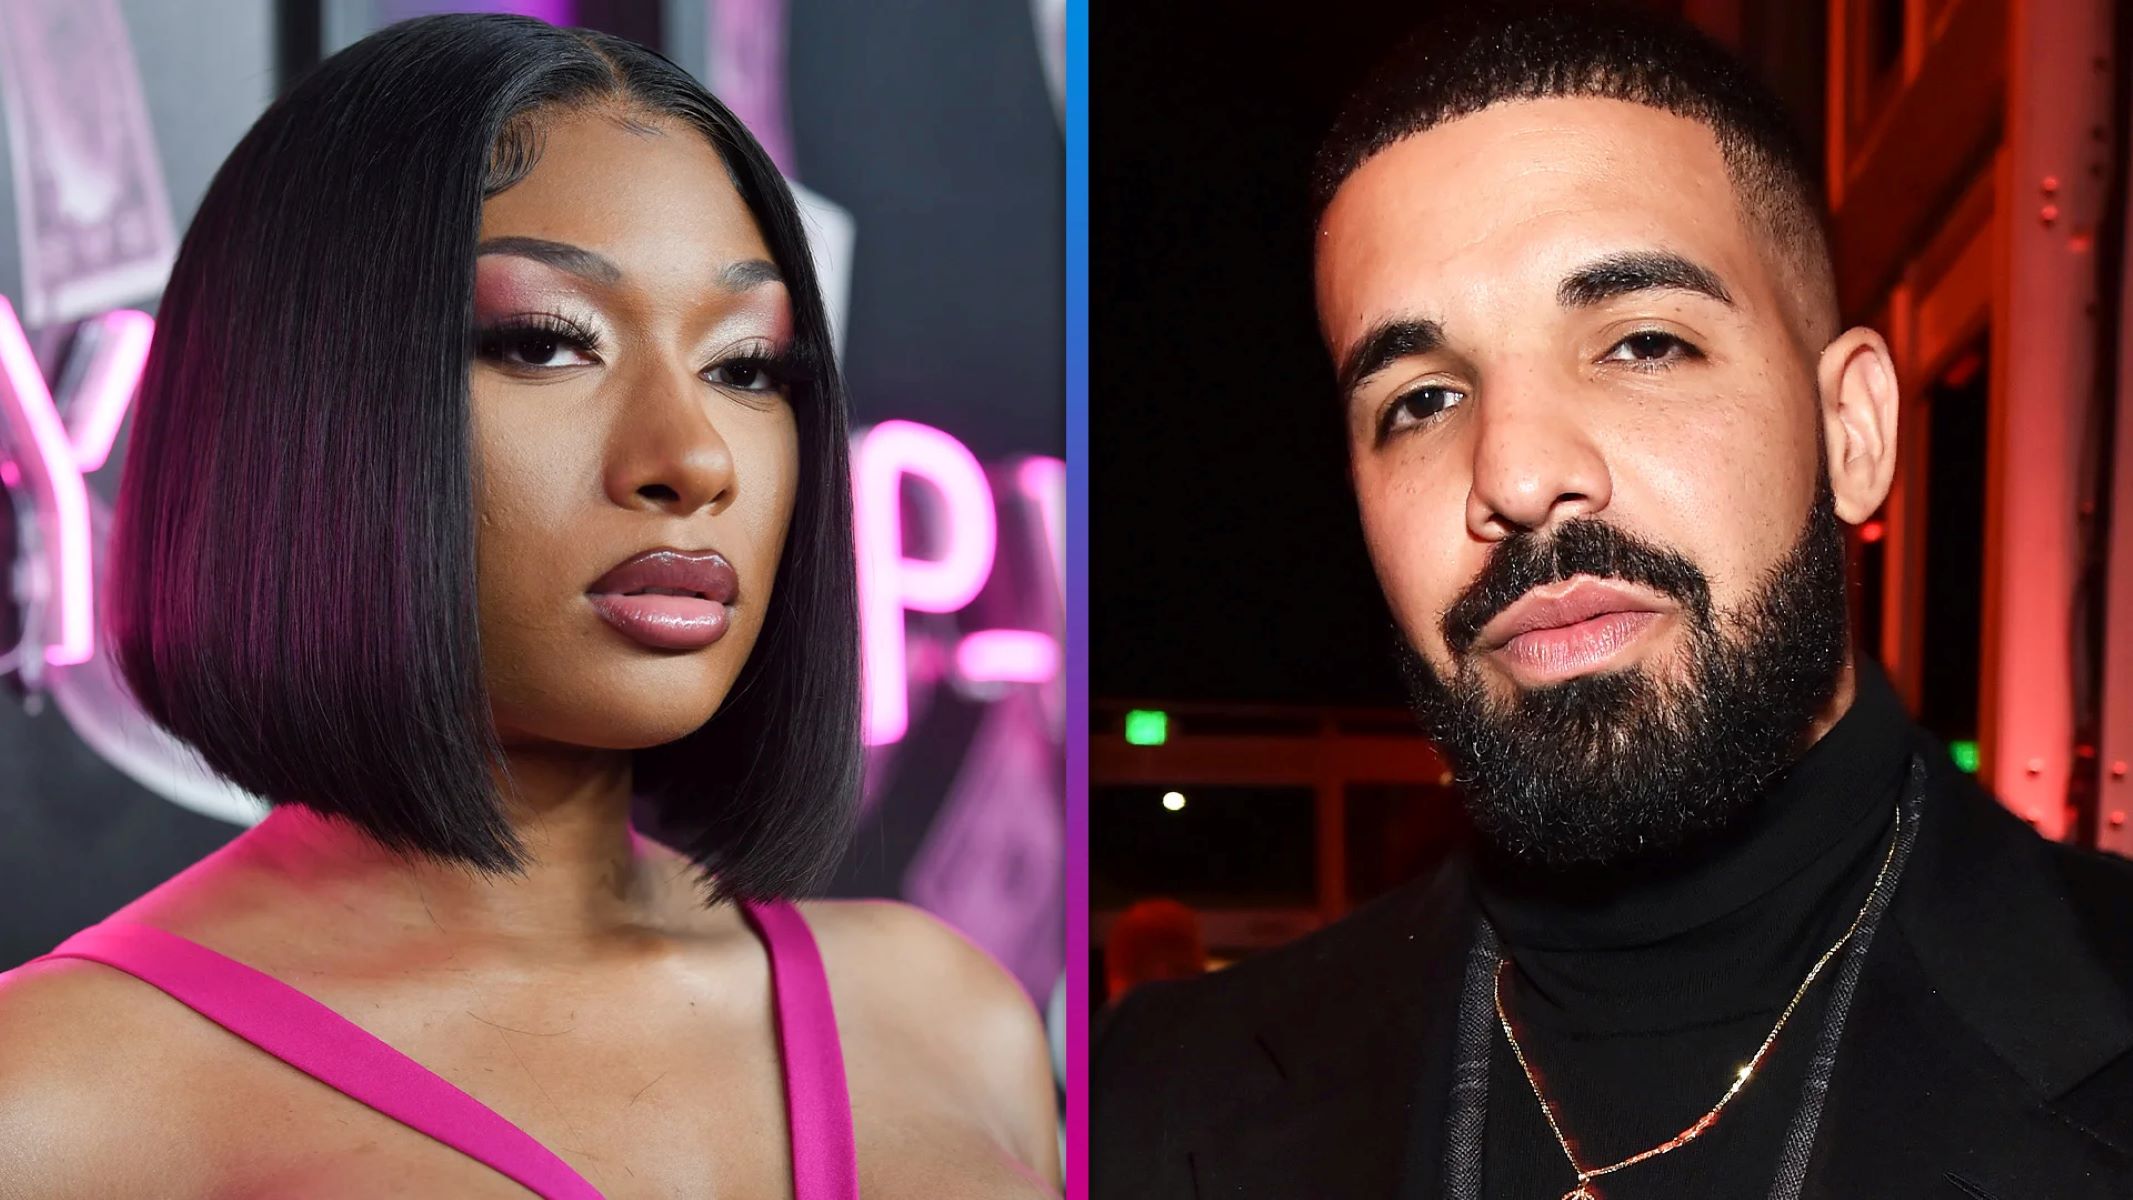 Tensions Emerge Between Drake And Megan Thee Stallion During Houston Show